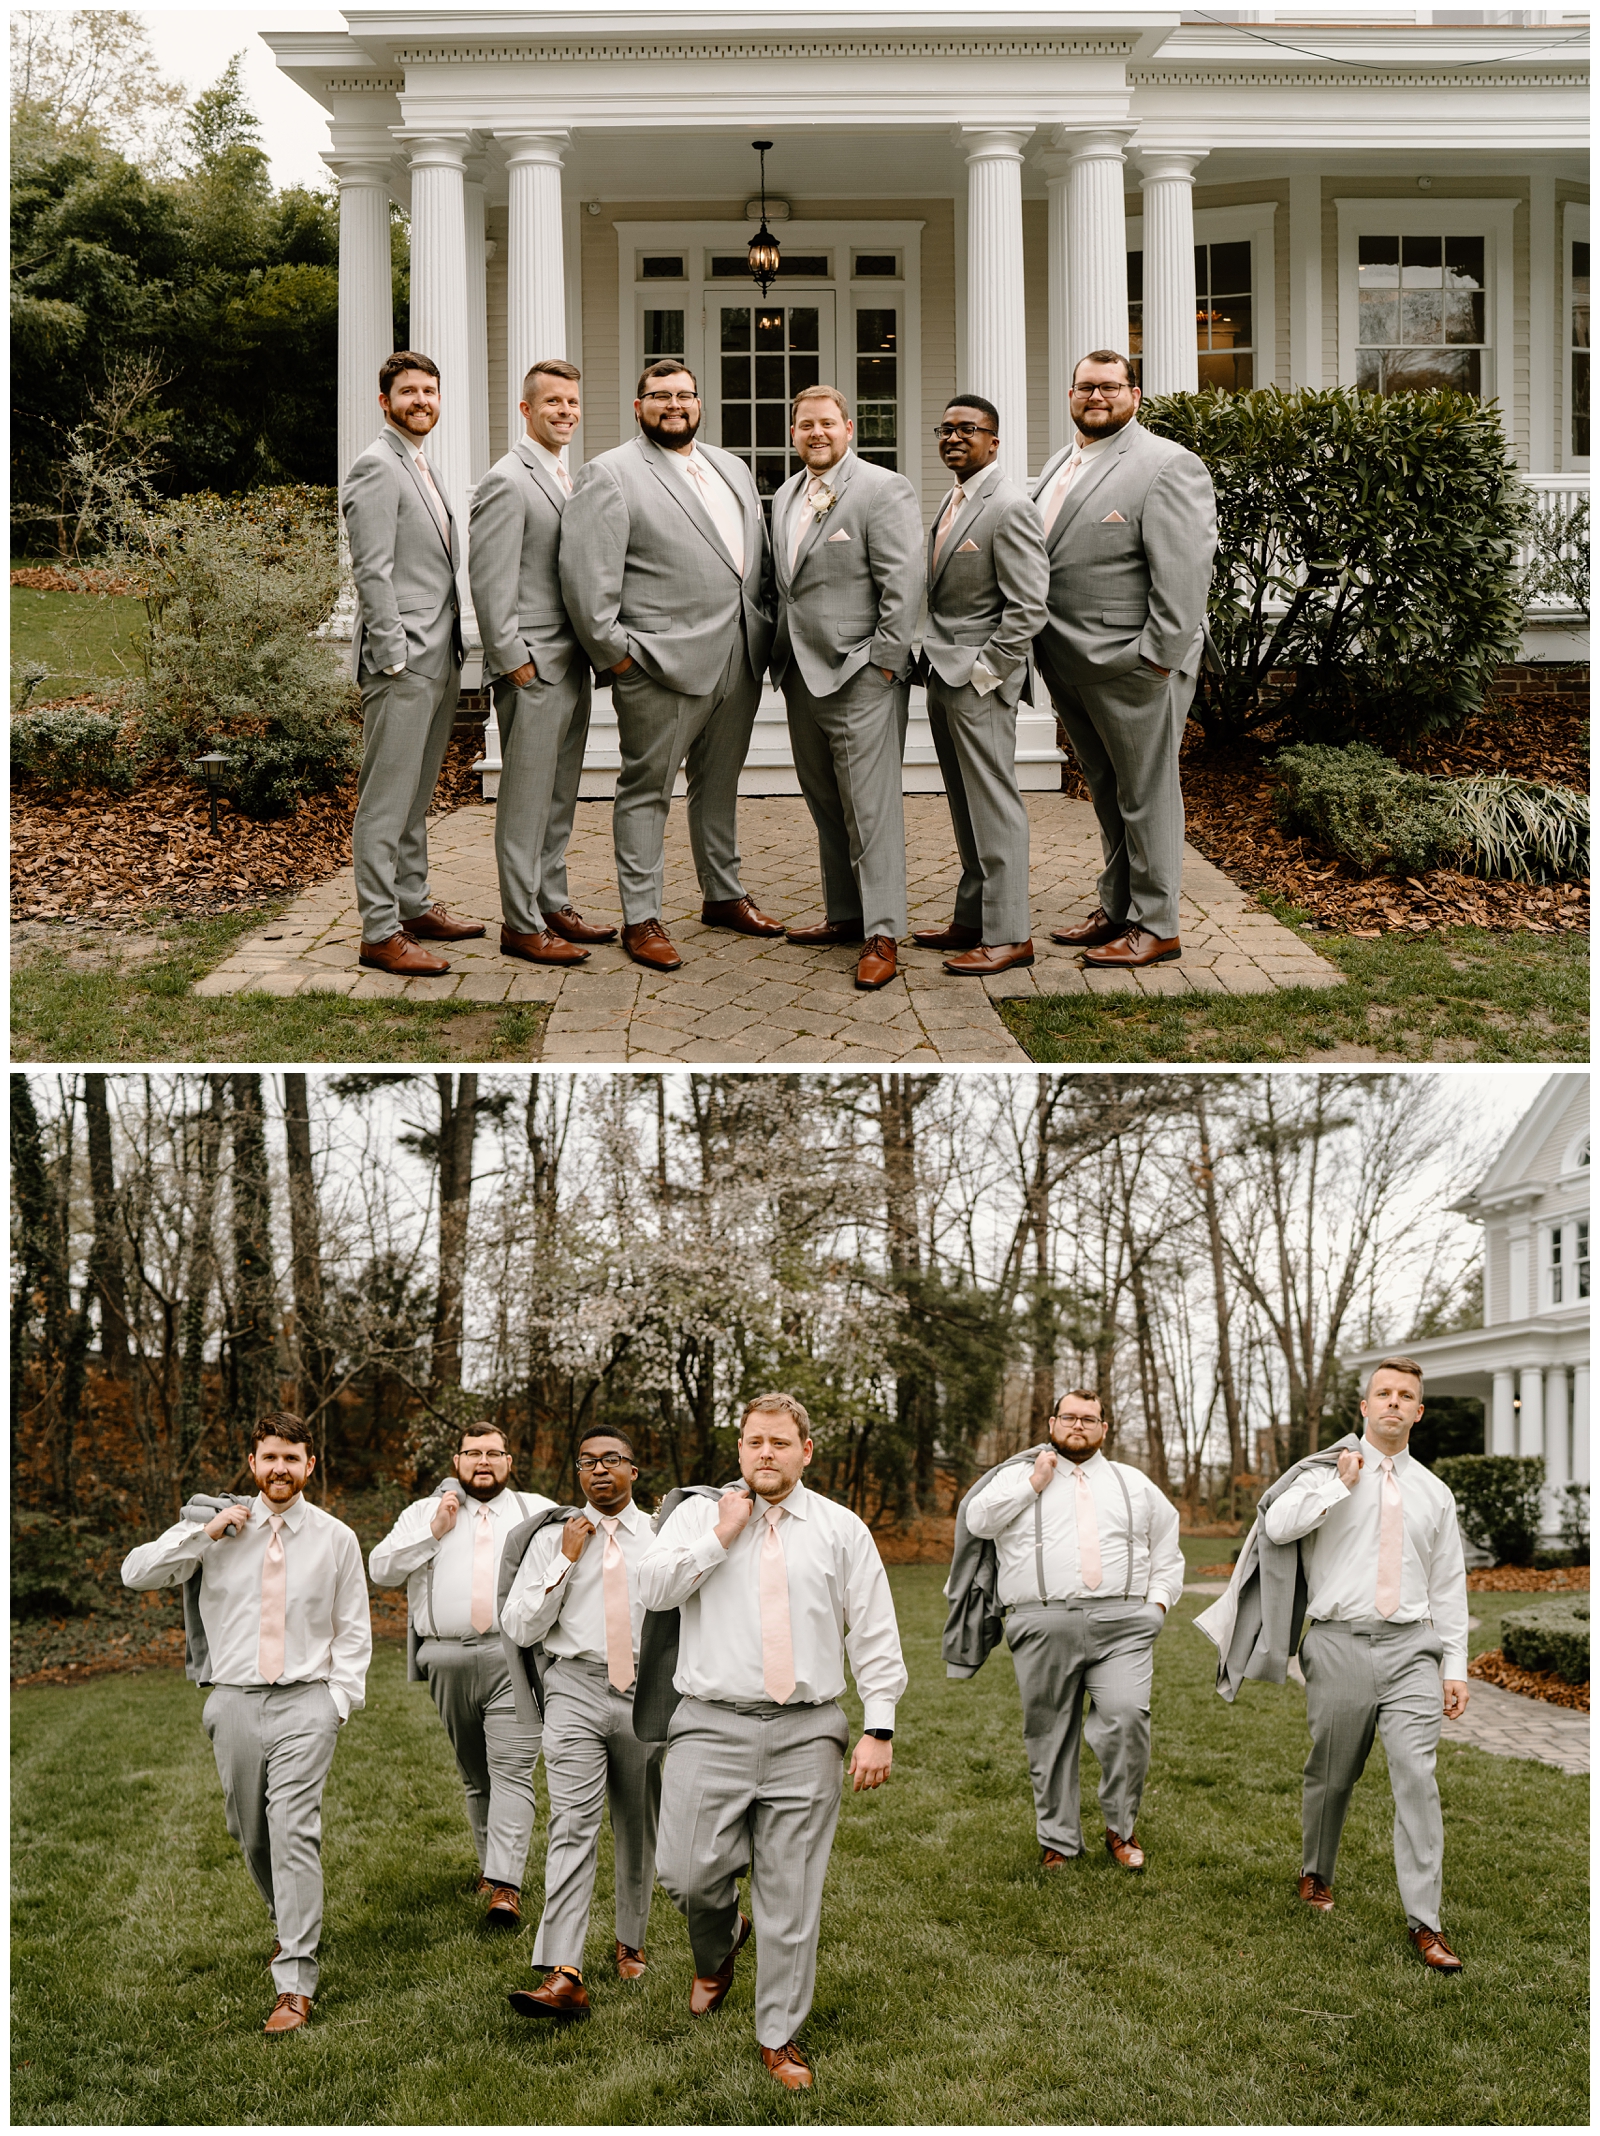 Groomsmen portraits in grey suits in Greensboro, NC at the McAlister-Leftwich House by North Carolina wedding photographer